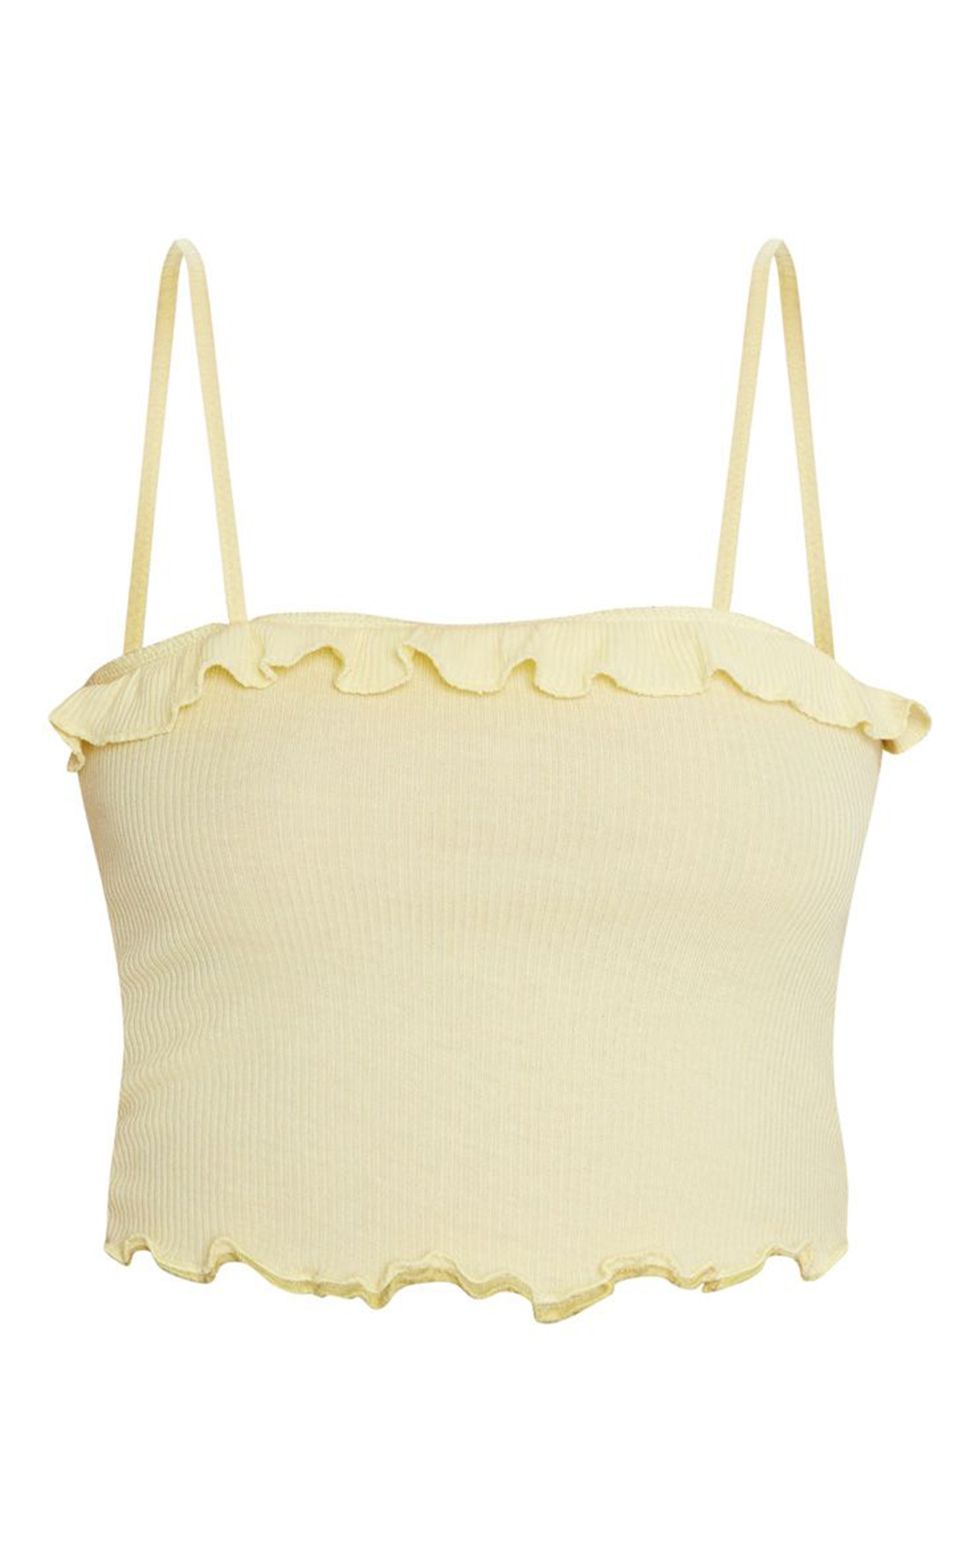 Yellow, Product, Crop top, Beige, camisoles, Fashion accessory, Basket, 